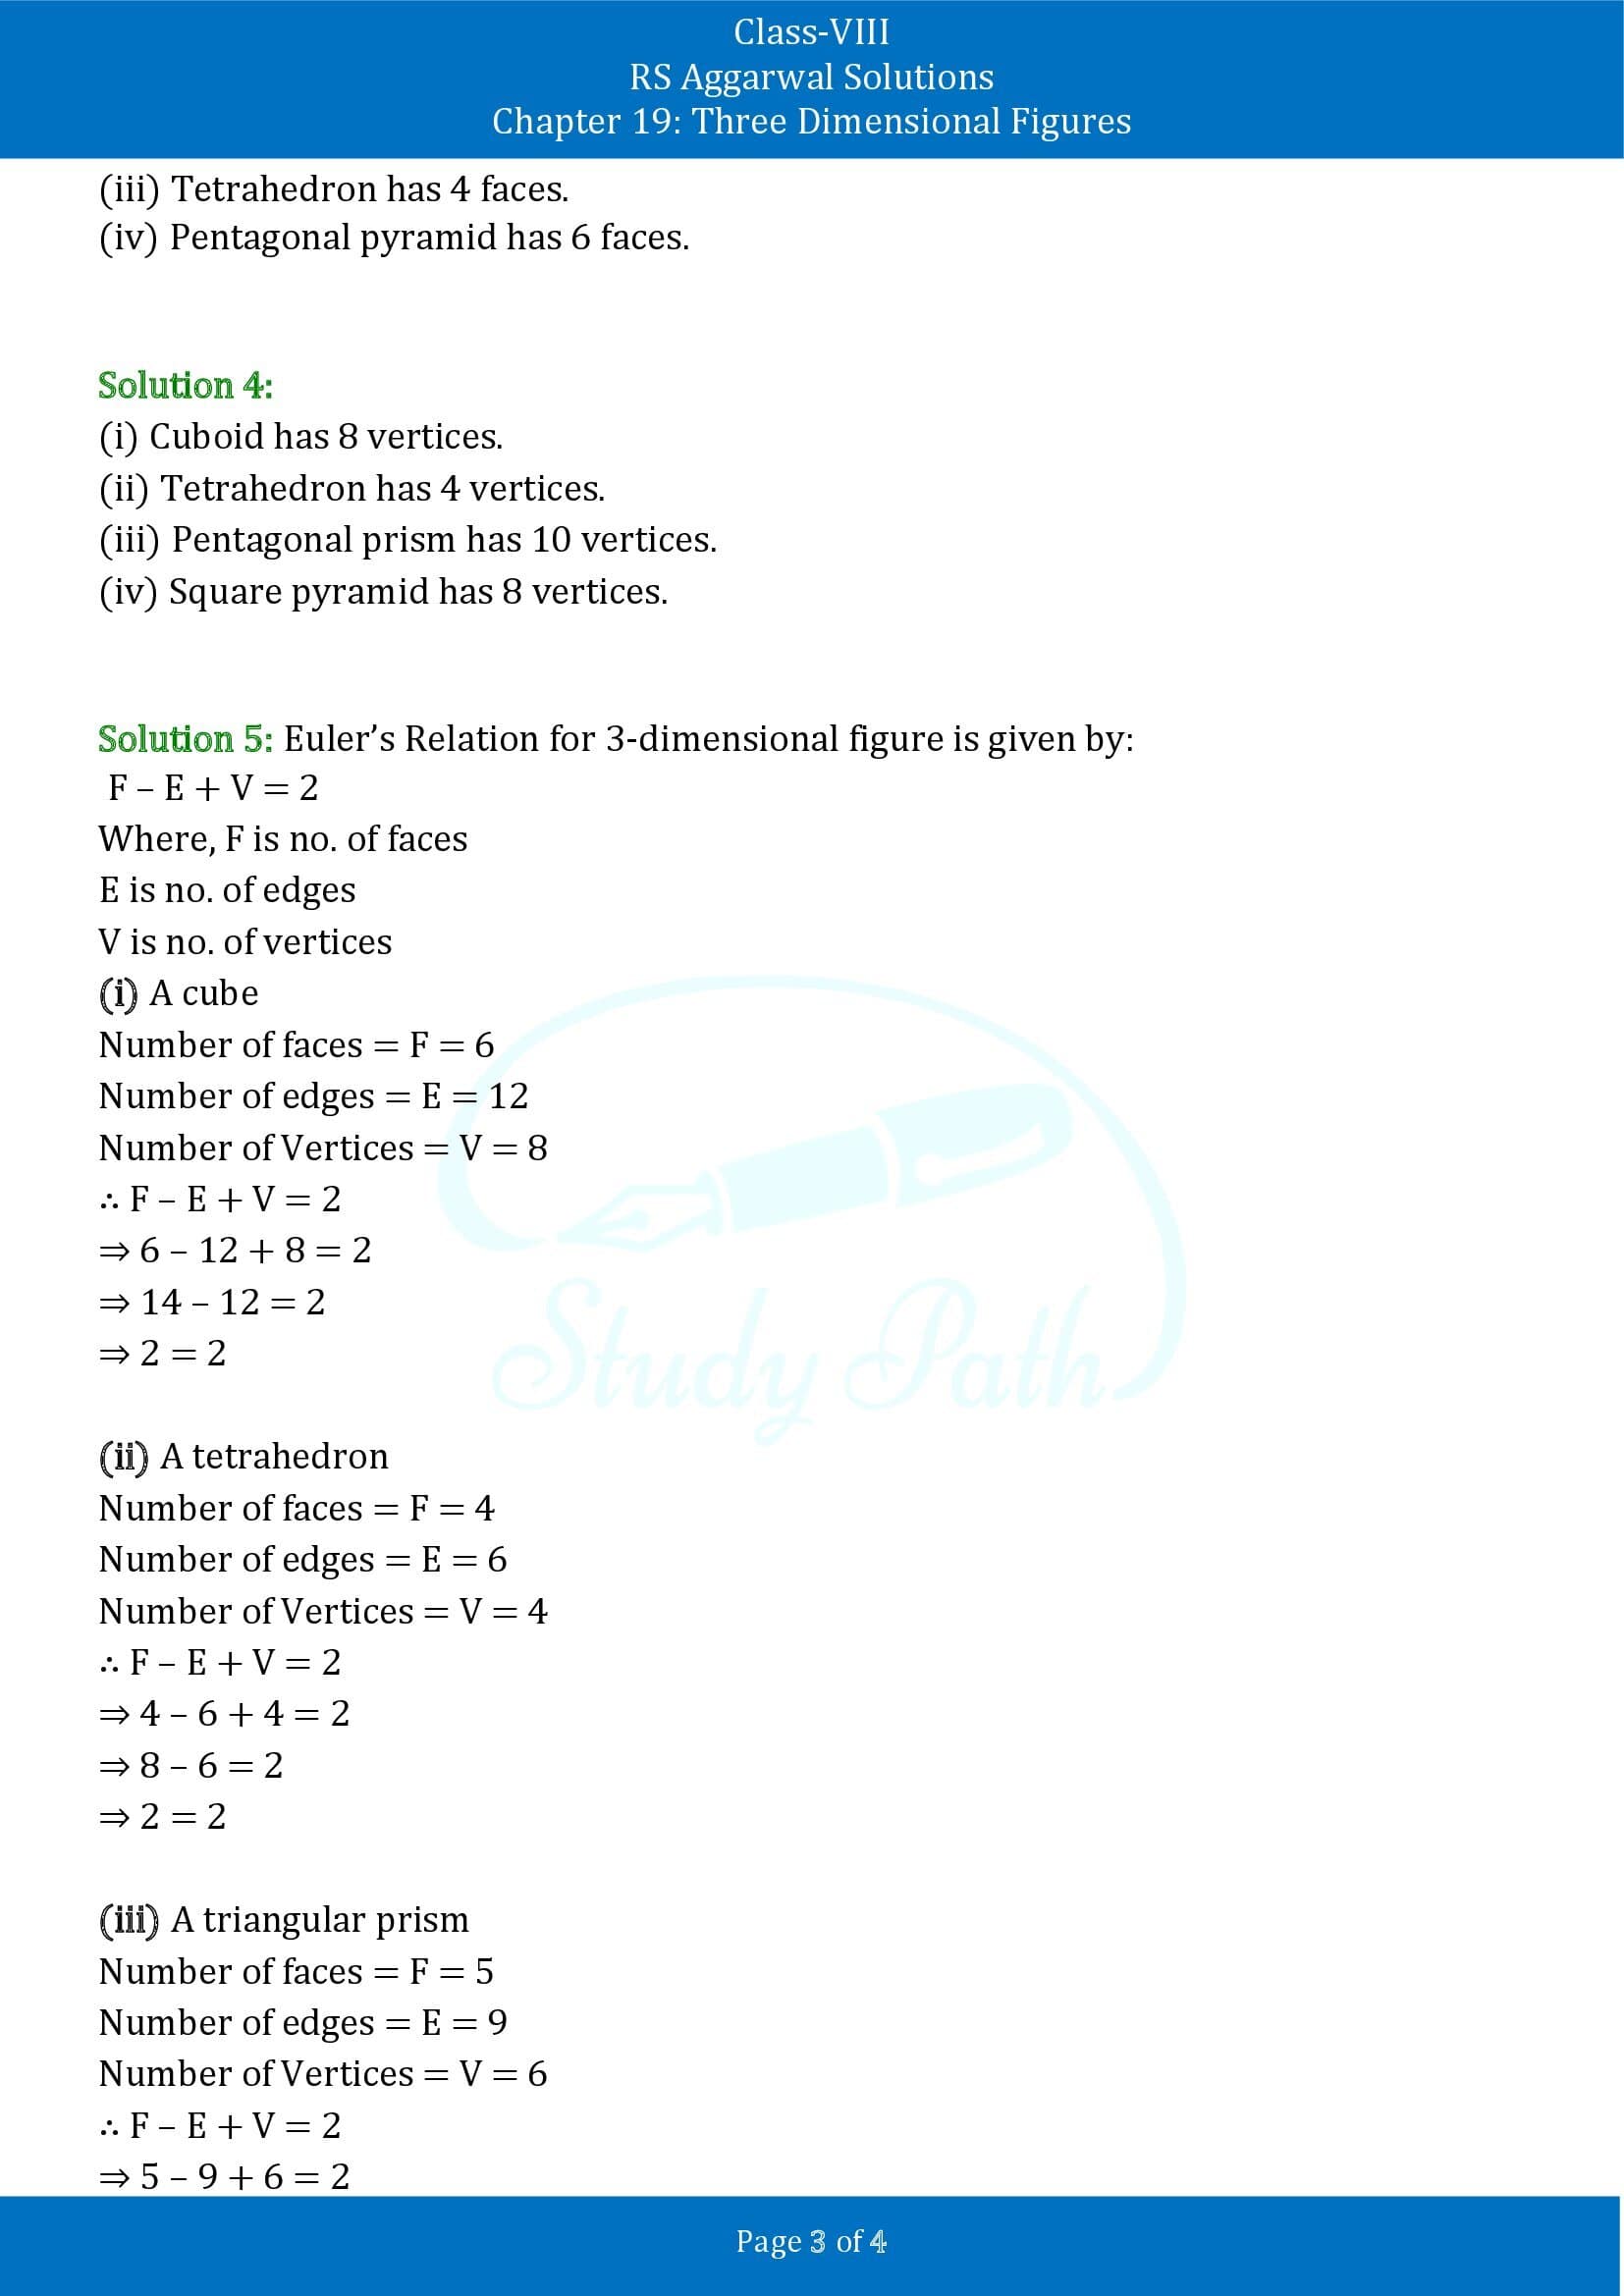 RS Aggarwal Solutions Class 8 Chapter 19 Three Dimensional Figures Exercise 19B 00003